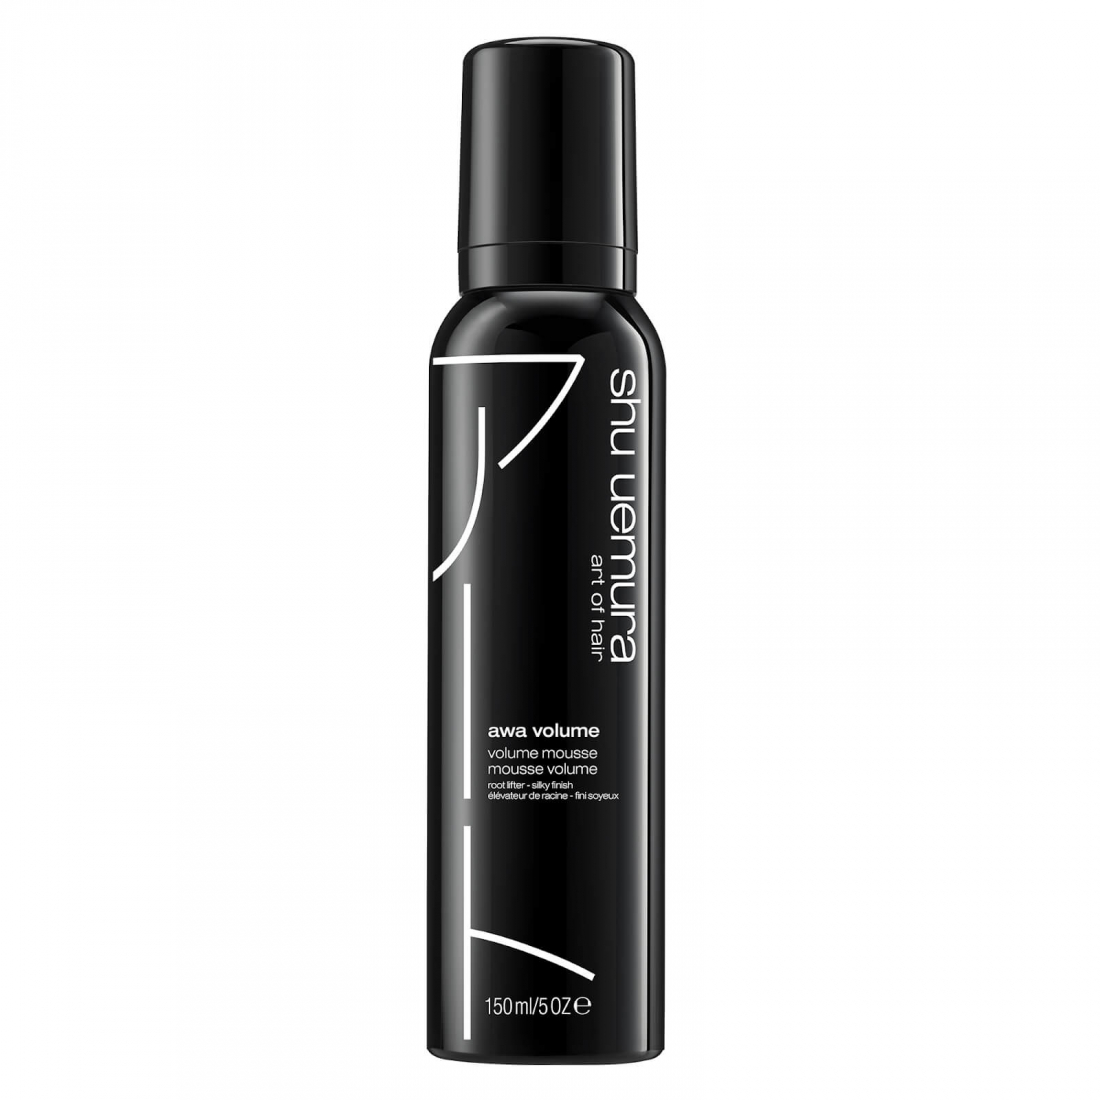 'The Art Of Styling Awa Volume' Hair Styling Mousse - 150 ml